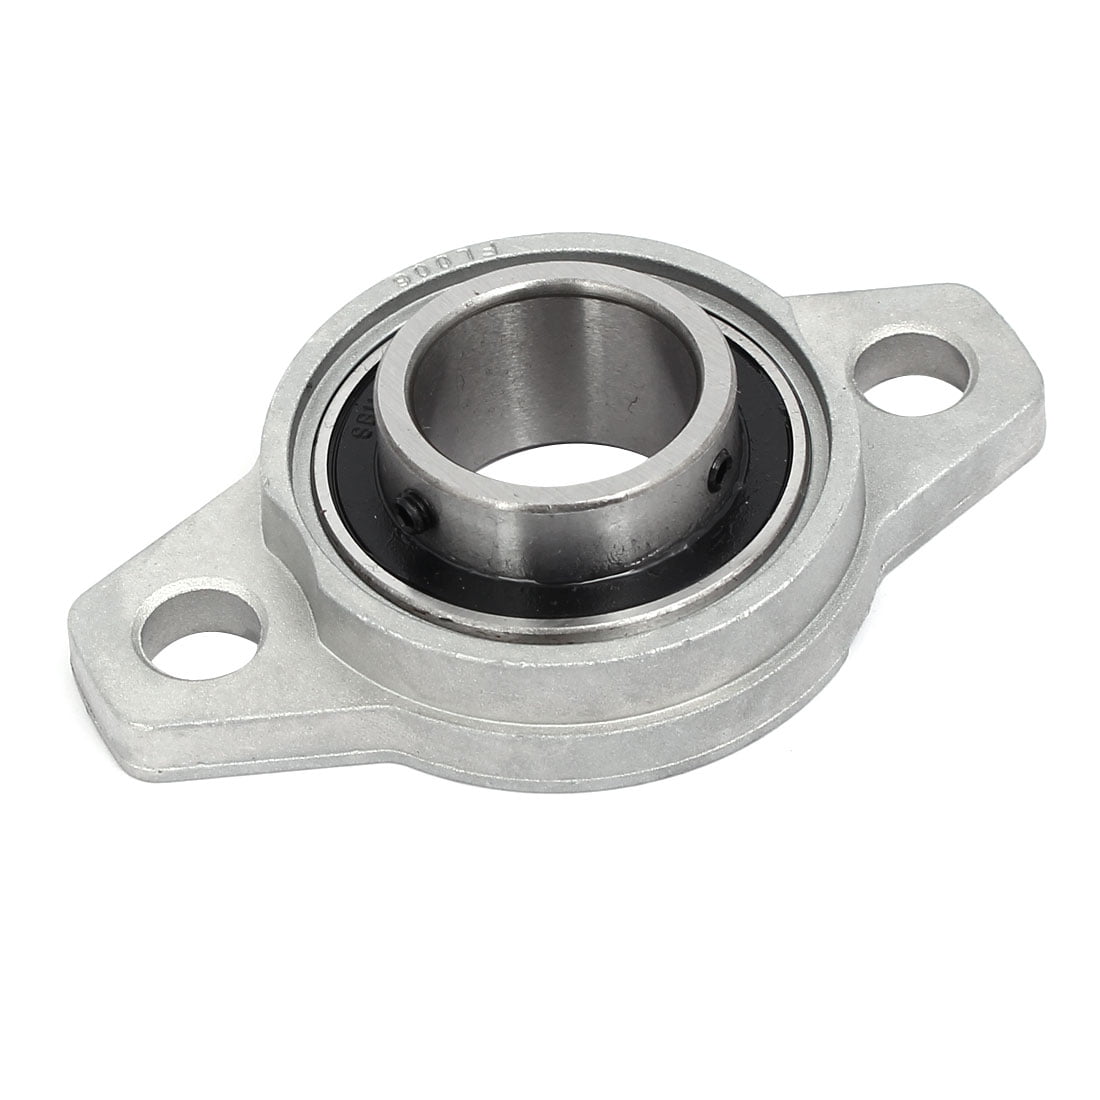 Mounted Ball Bearings With Two Bolt Flange